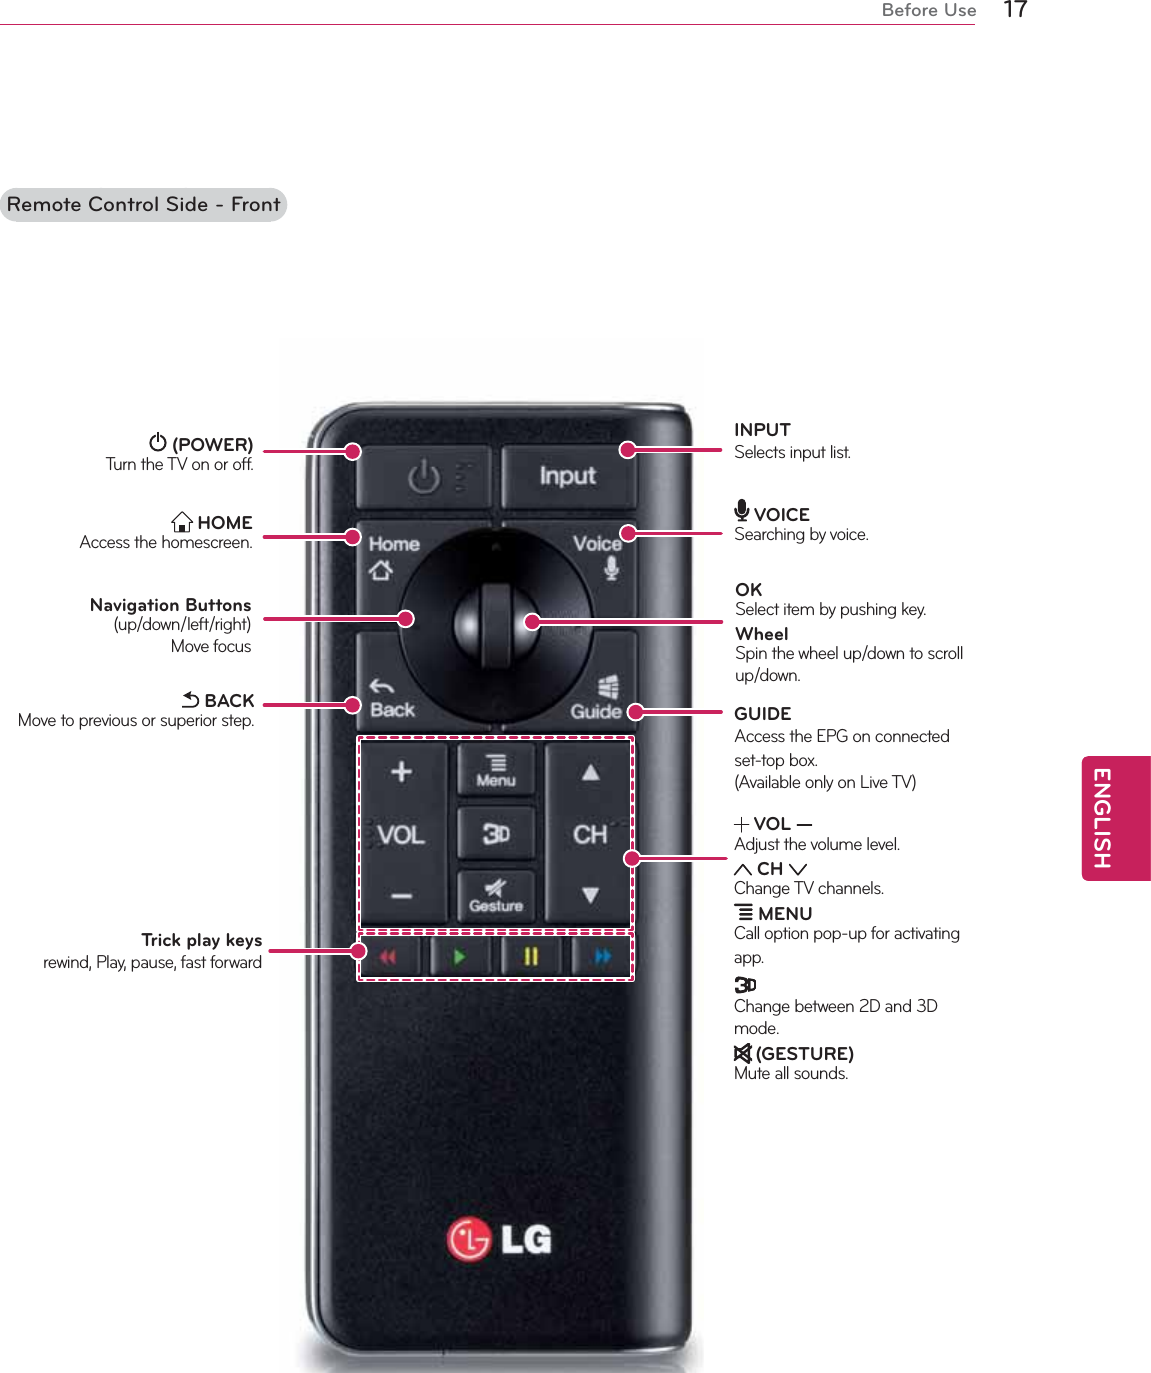 17ENGENGLISHBefore UseRemote Control Side - Front VOL Adjust the volume level. CH Change TV channels. MENUCall option pop-up for activating app.Change between 2D and 3D mode. (GESTURE)Mute all sounds. (POWER)Turn the TV on or off. HOMEAccess the homescreen.GUIDEAccess the EPG on connected set-top box.(Available only on Live TV)OKSelect item by pushing key.WheelSpin the wheel up/down to scroll up/down.Navigation Buttons(up/down/left/right)Move focusTrick play keys  rewind, Play, pause, fast forwardINPUTSelects input list.   BACKMove to previous or superior step. VOICESearching by voice.